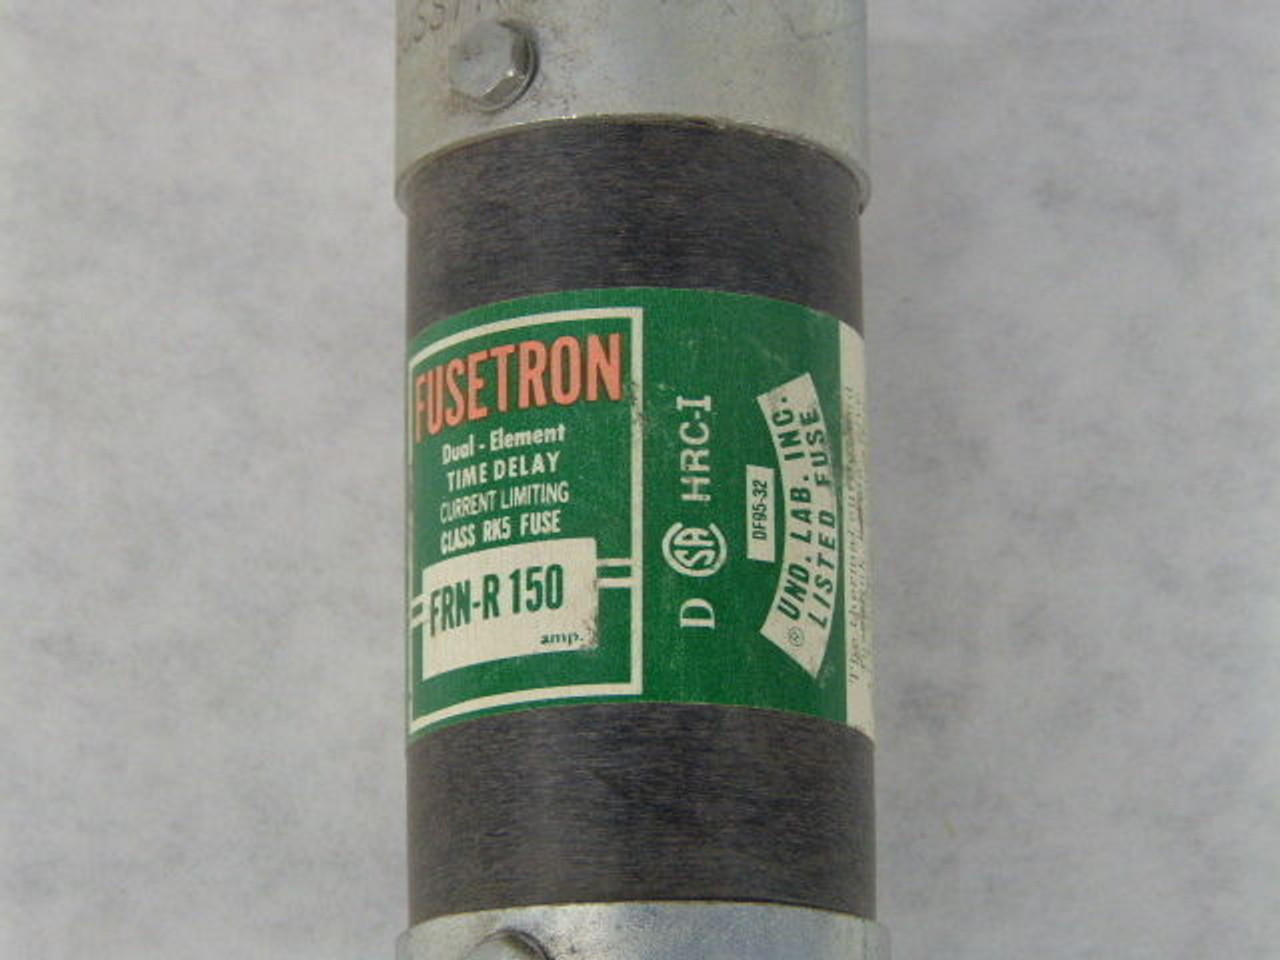 Fusetron FRN-R-150 Time Delay Fuse 150A 250V USED